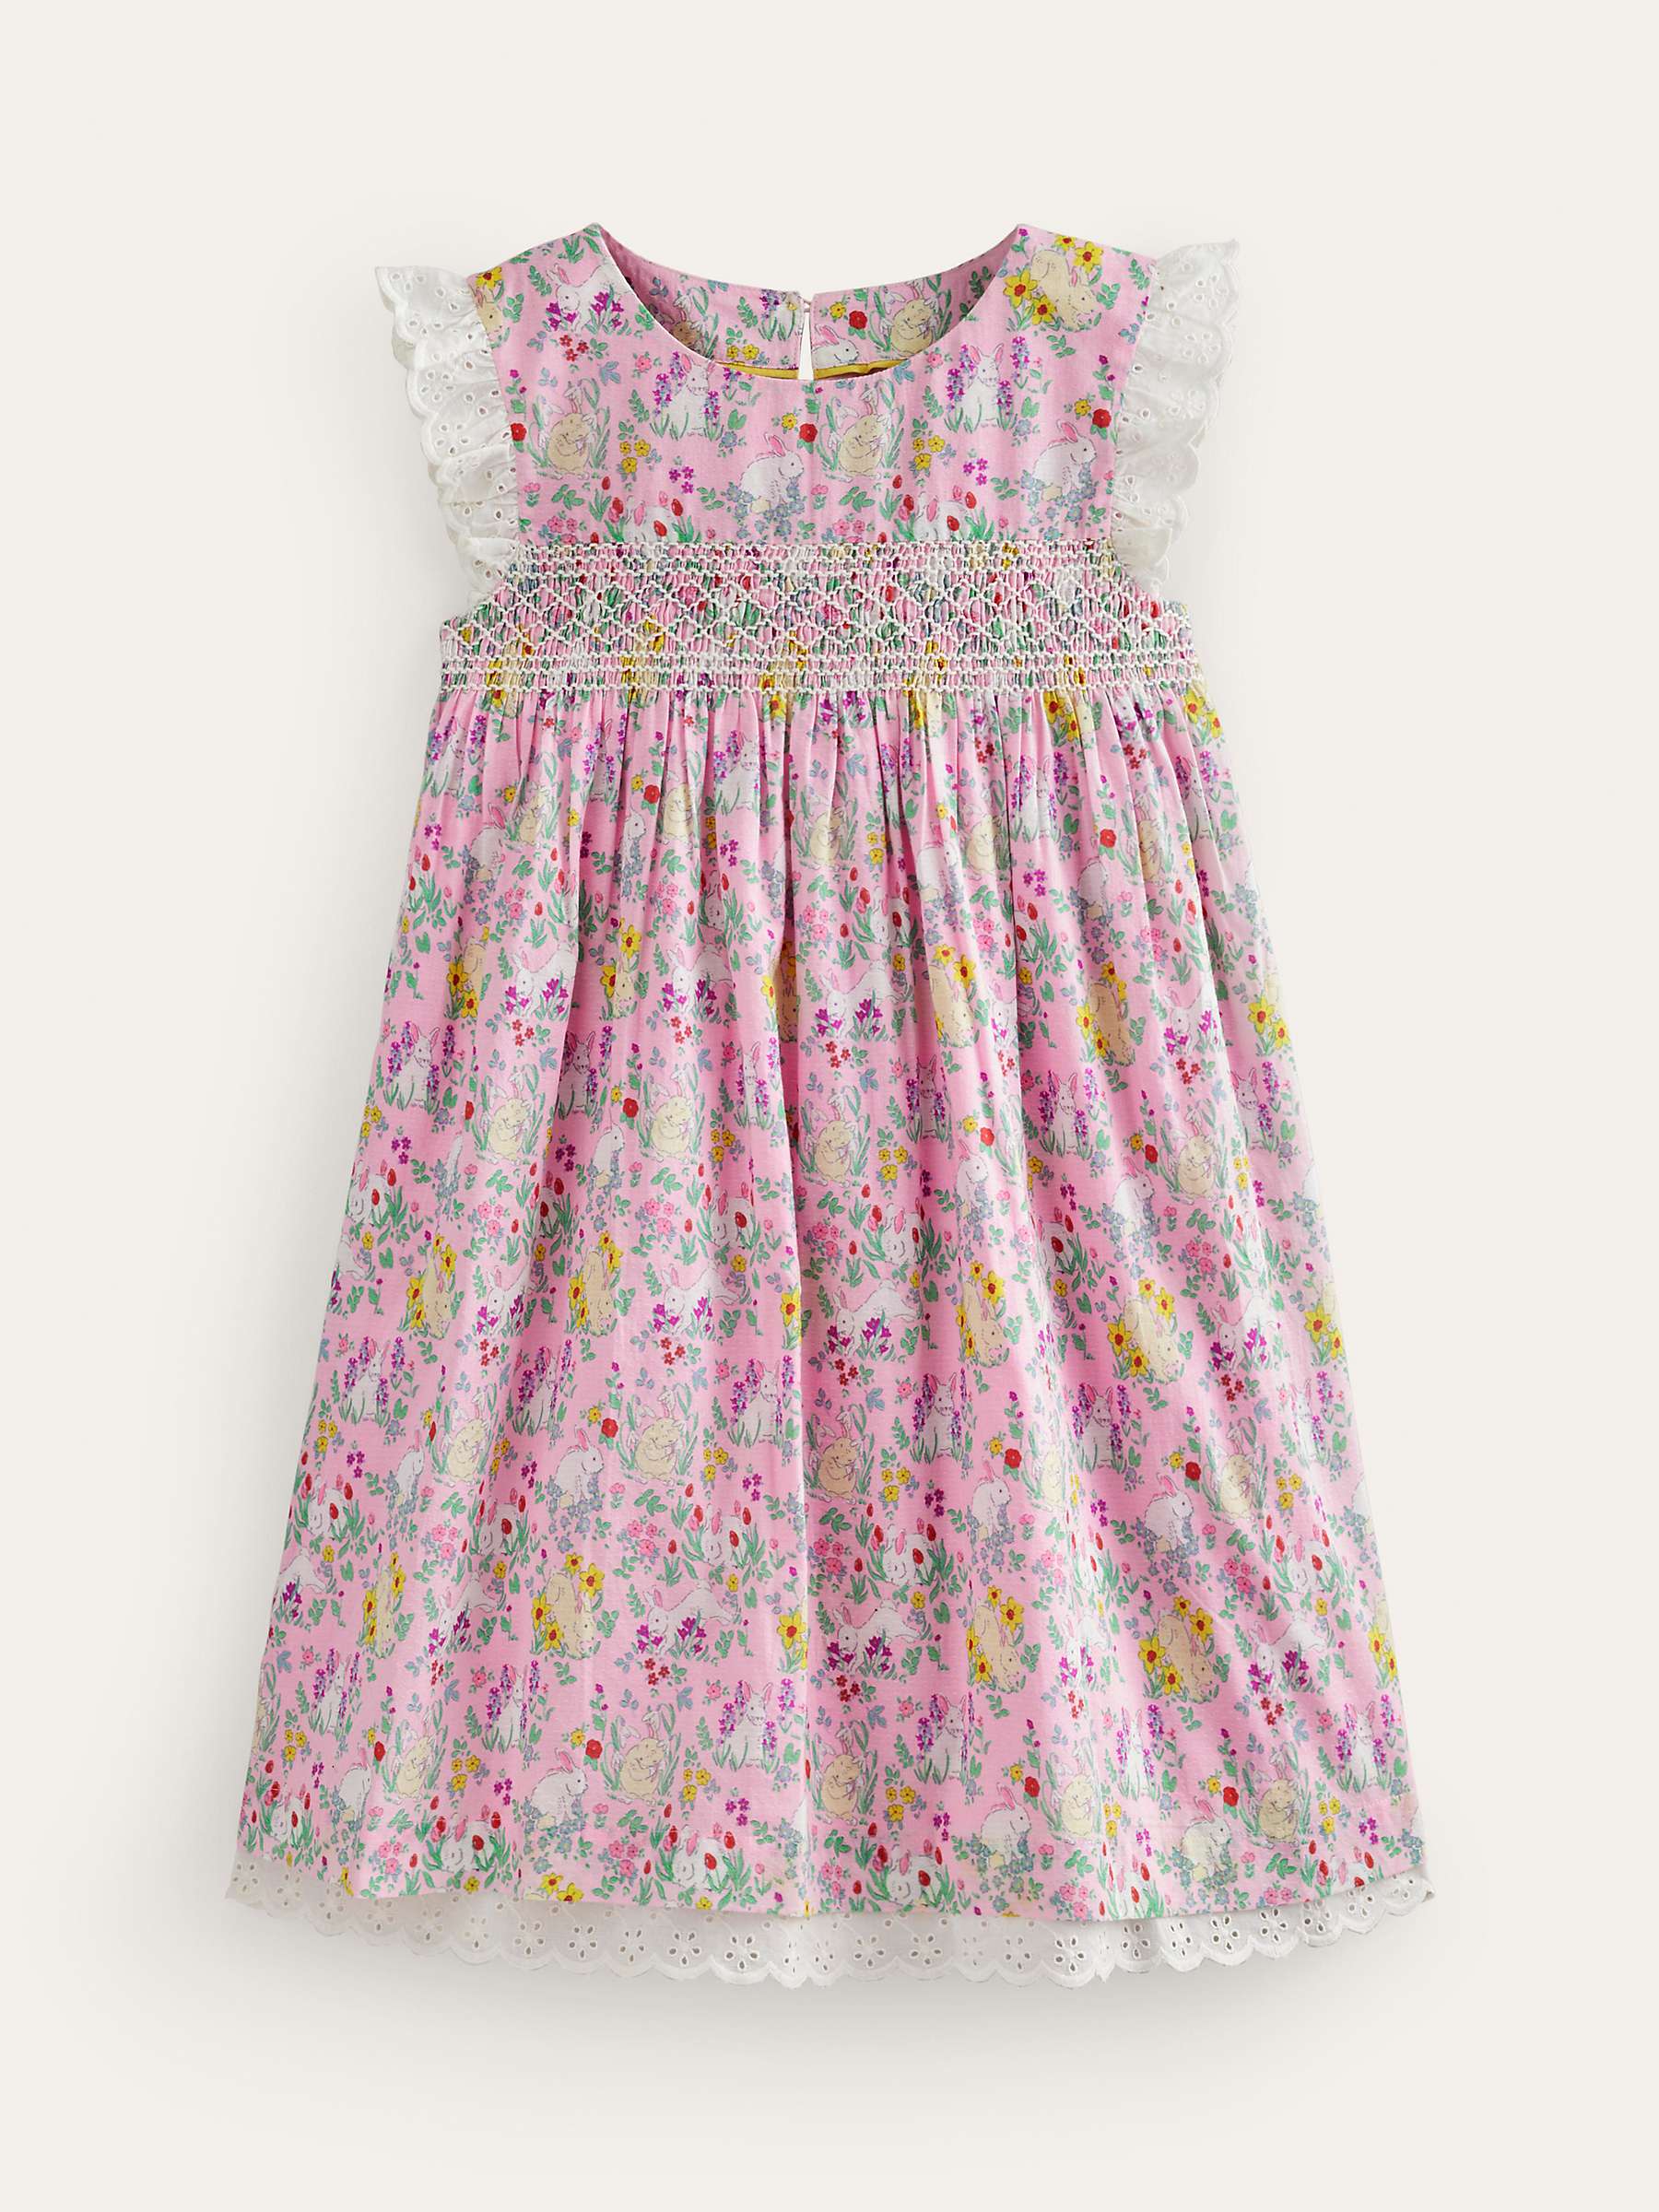 Buy Mini Boden Kids' Bunny Print Smocked Lace Trim Dress, Pea Meadow Online at johnlewis.com